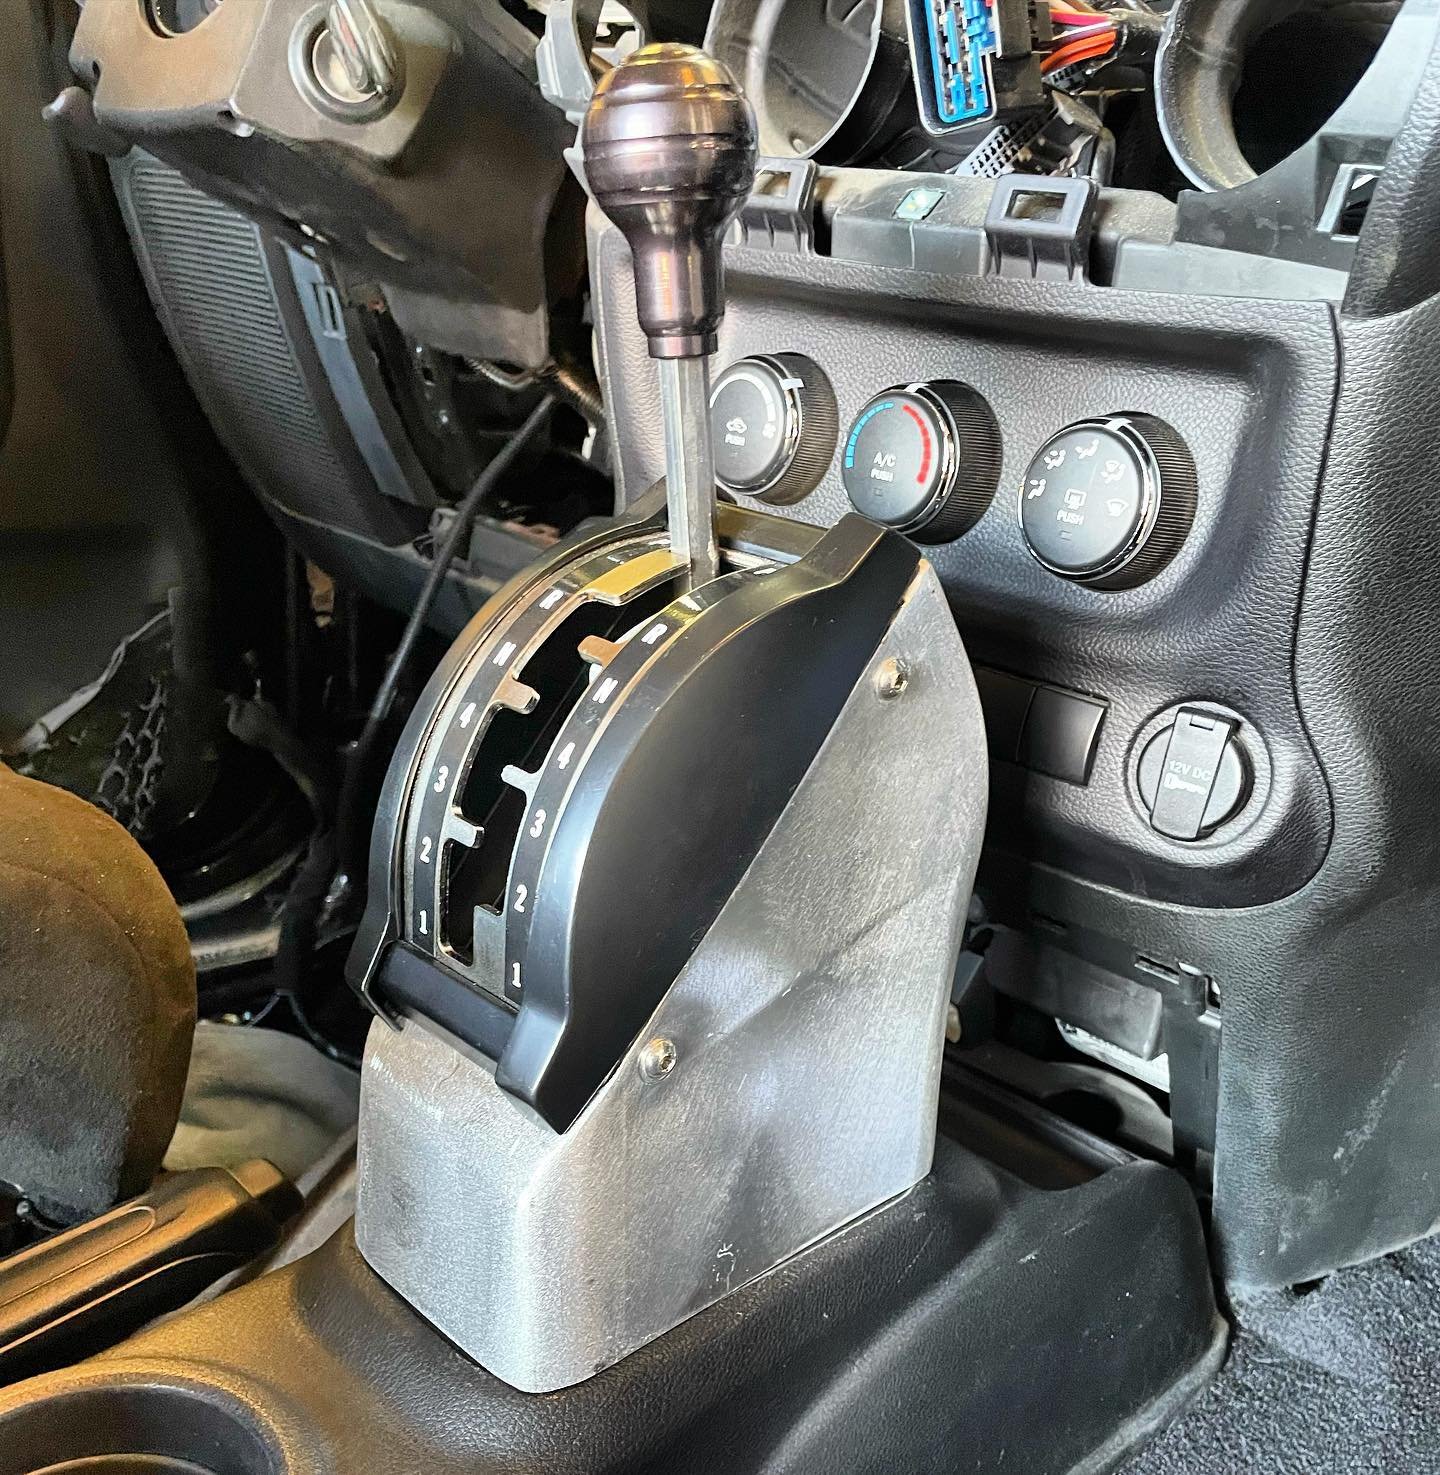 As we continue on @connormosack Jeep Wrangler unlimited build, @alldayfab got this slick shifter mount made for the 4l80e transmission this Jeep has.  It works with the factory center console and will be powder-coated a texture black to match the fac